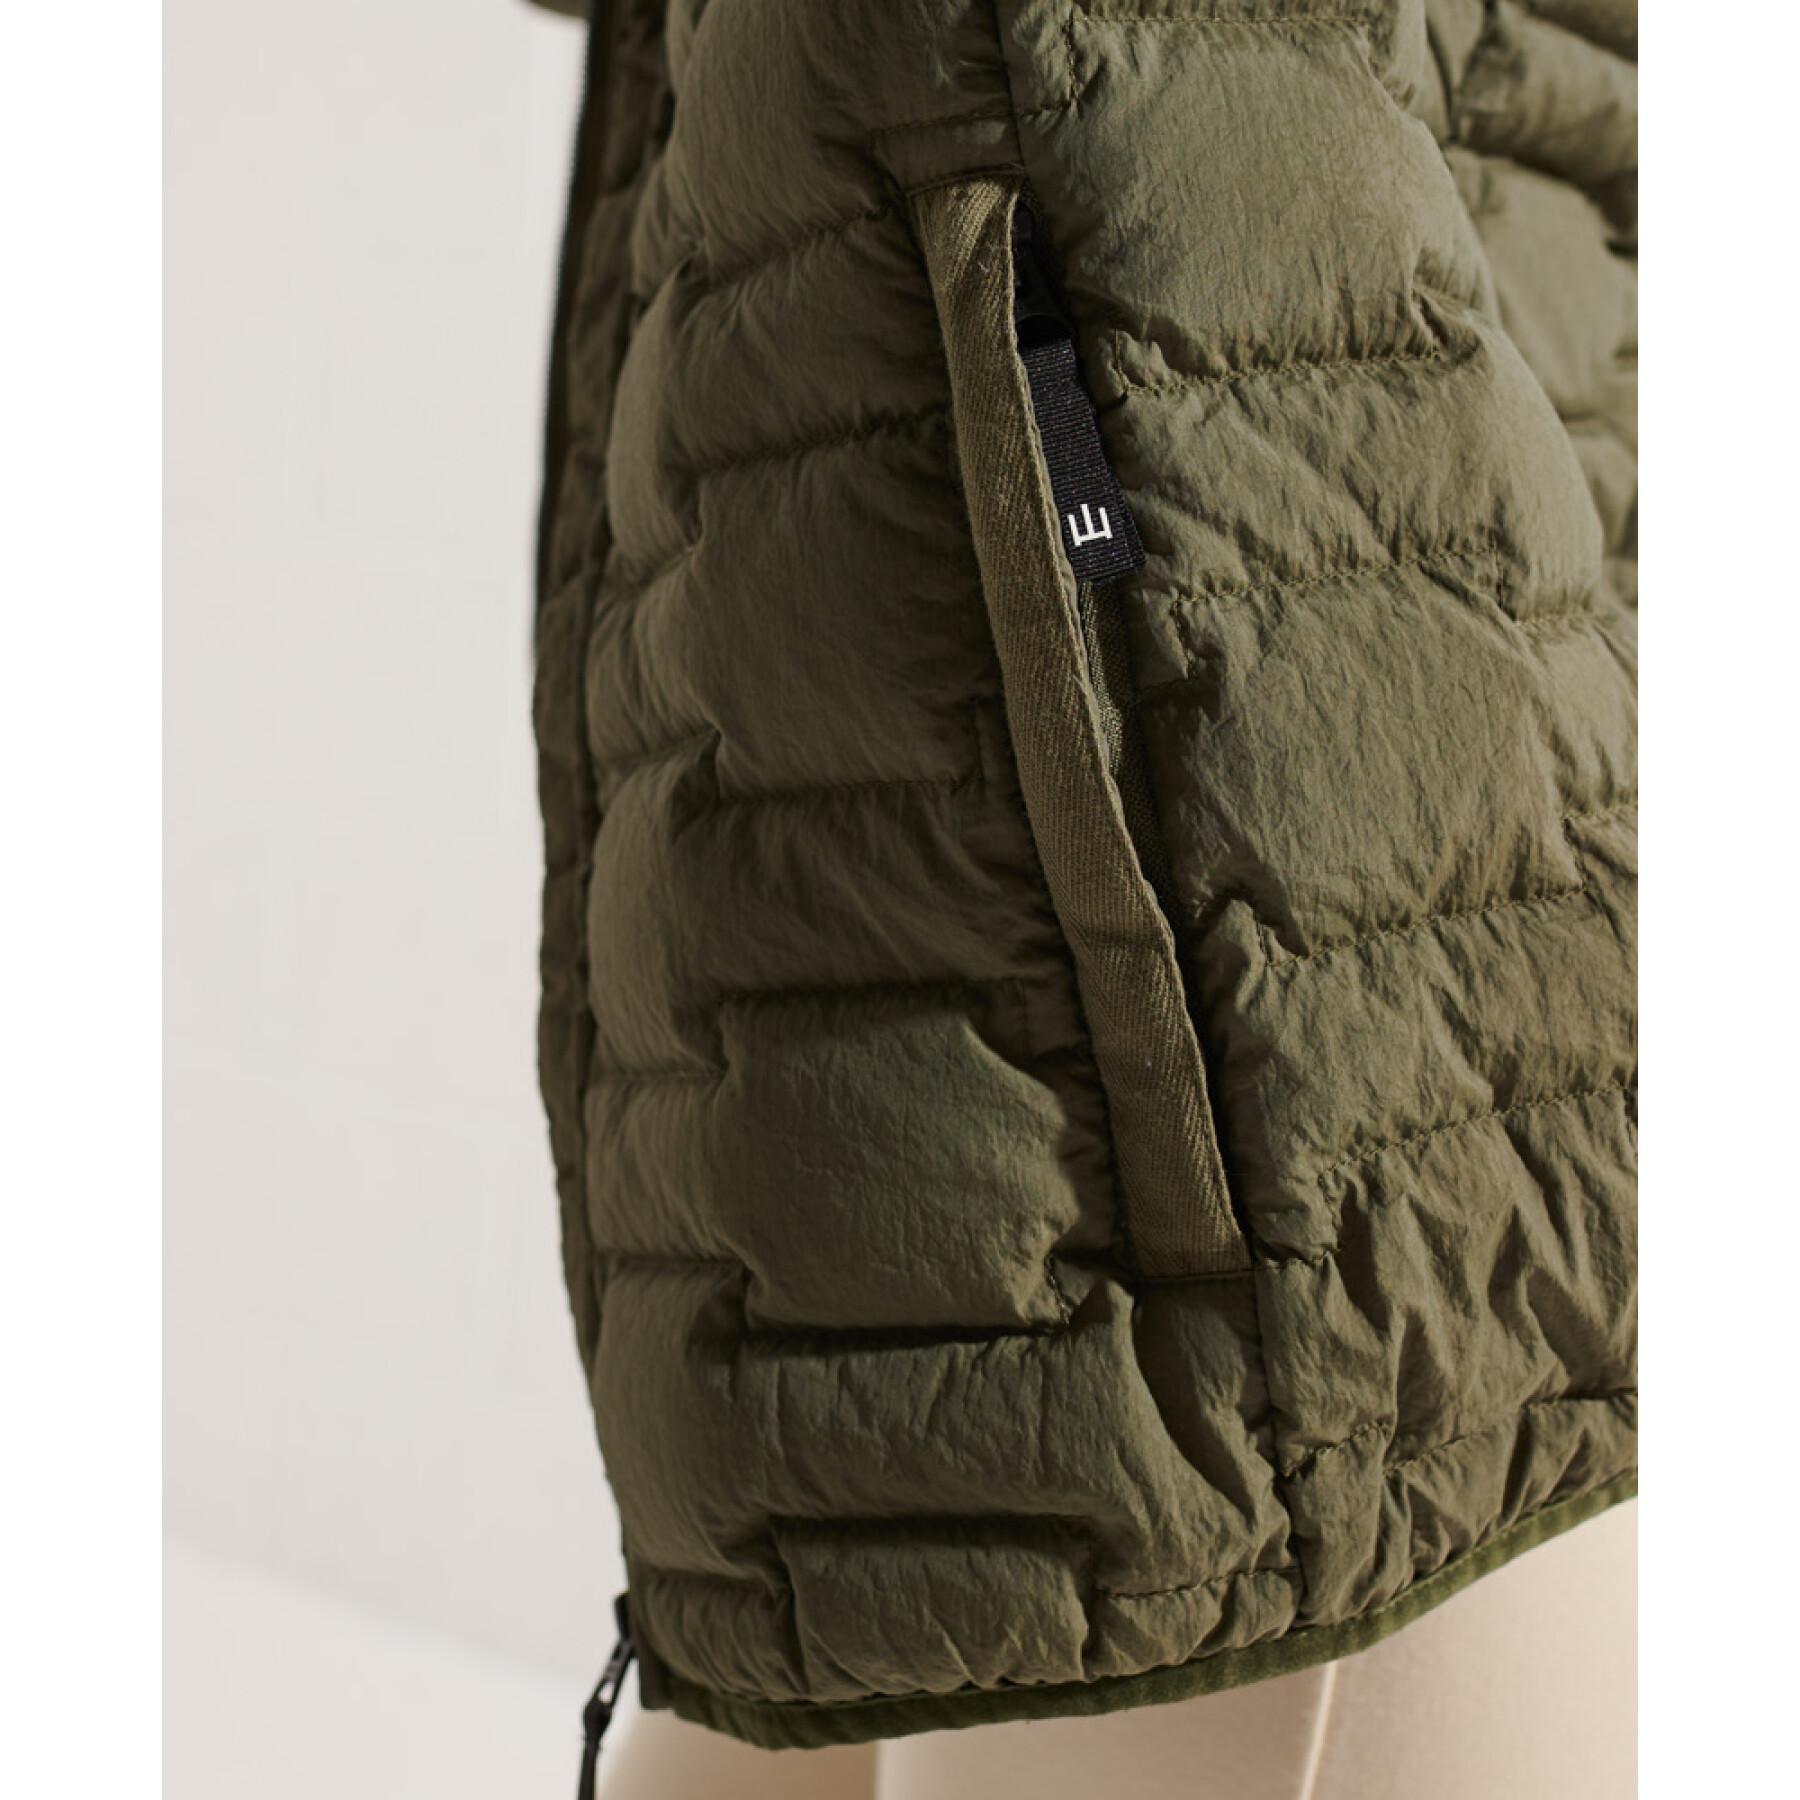 Doudoune femme Superdry SD Expedition